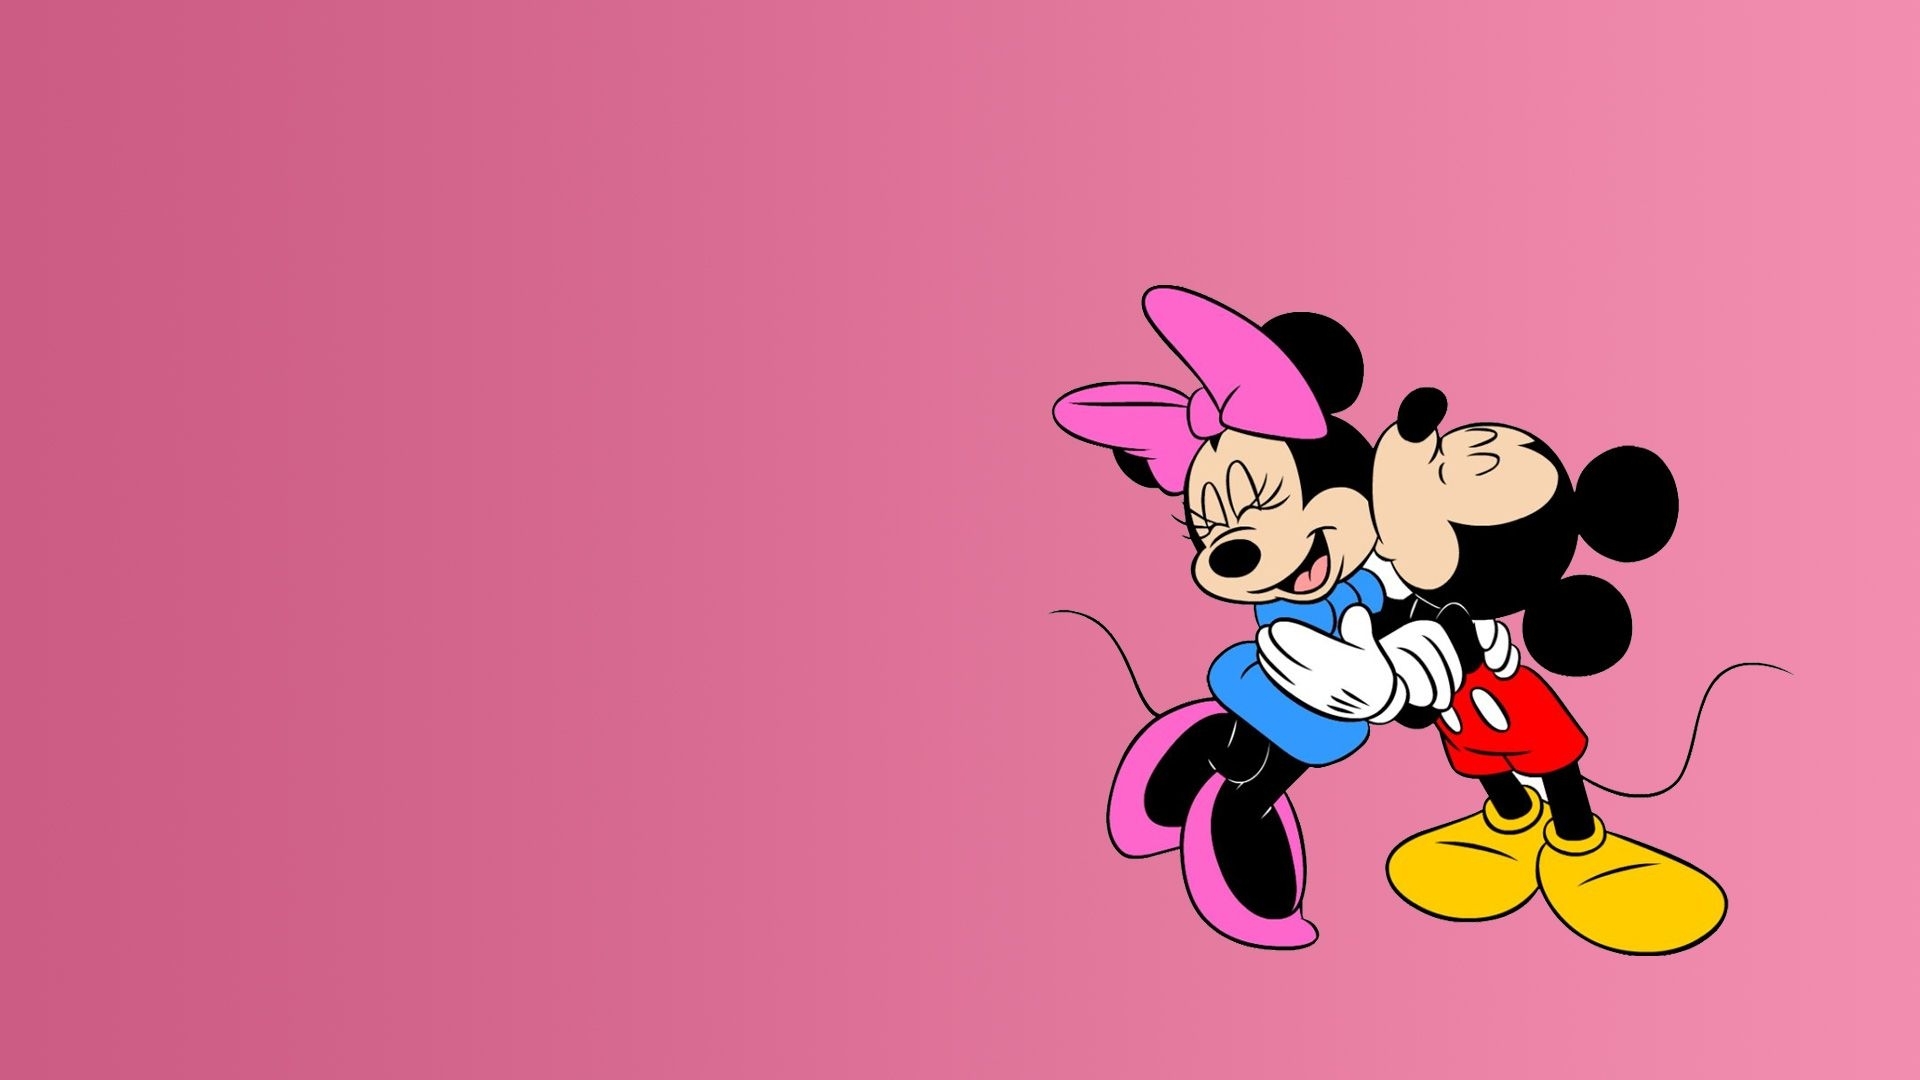 10 Latest Mickey And Minnie Mouse Wallpaper FULL HD 1080p For PC Background